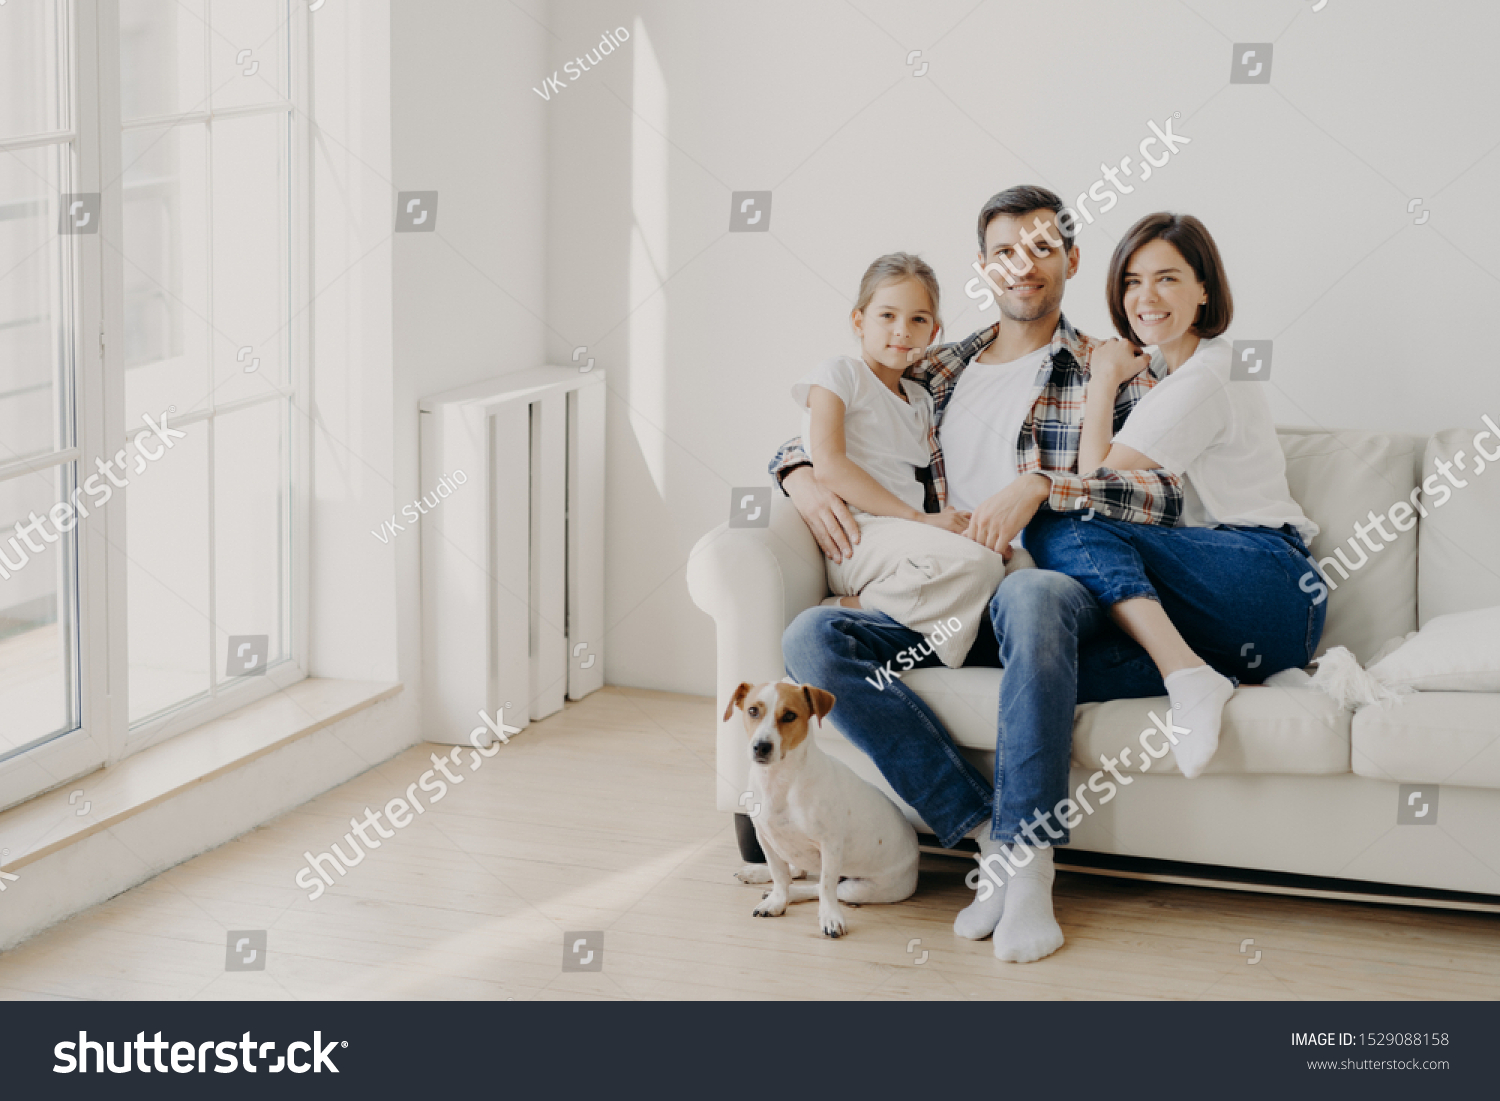 Family, togetherness and relationnship concept. Happy man embraces daughter and wife, sit on comfortable white sofa in empty room, their pet sits on floor, make family portrait for long memory #1529088158